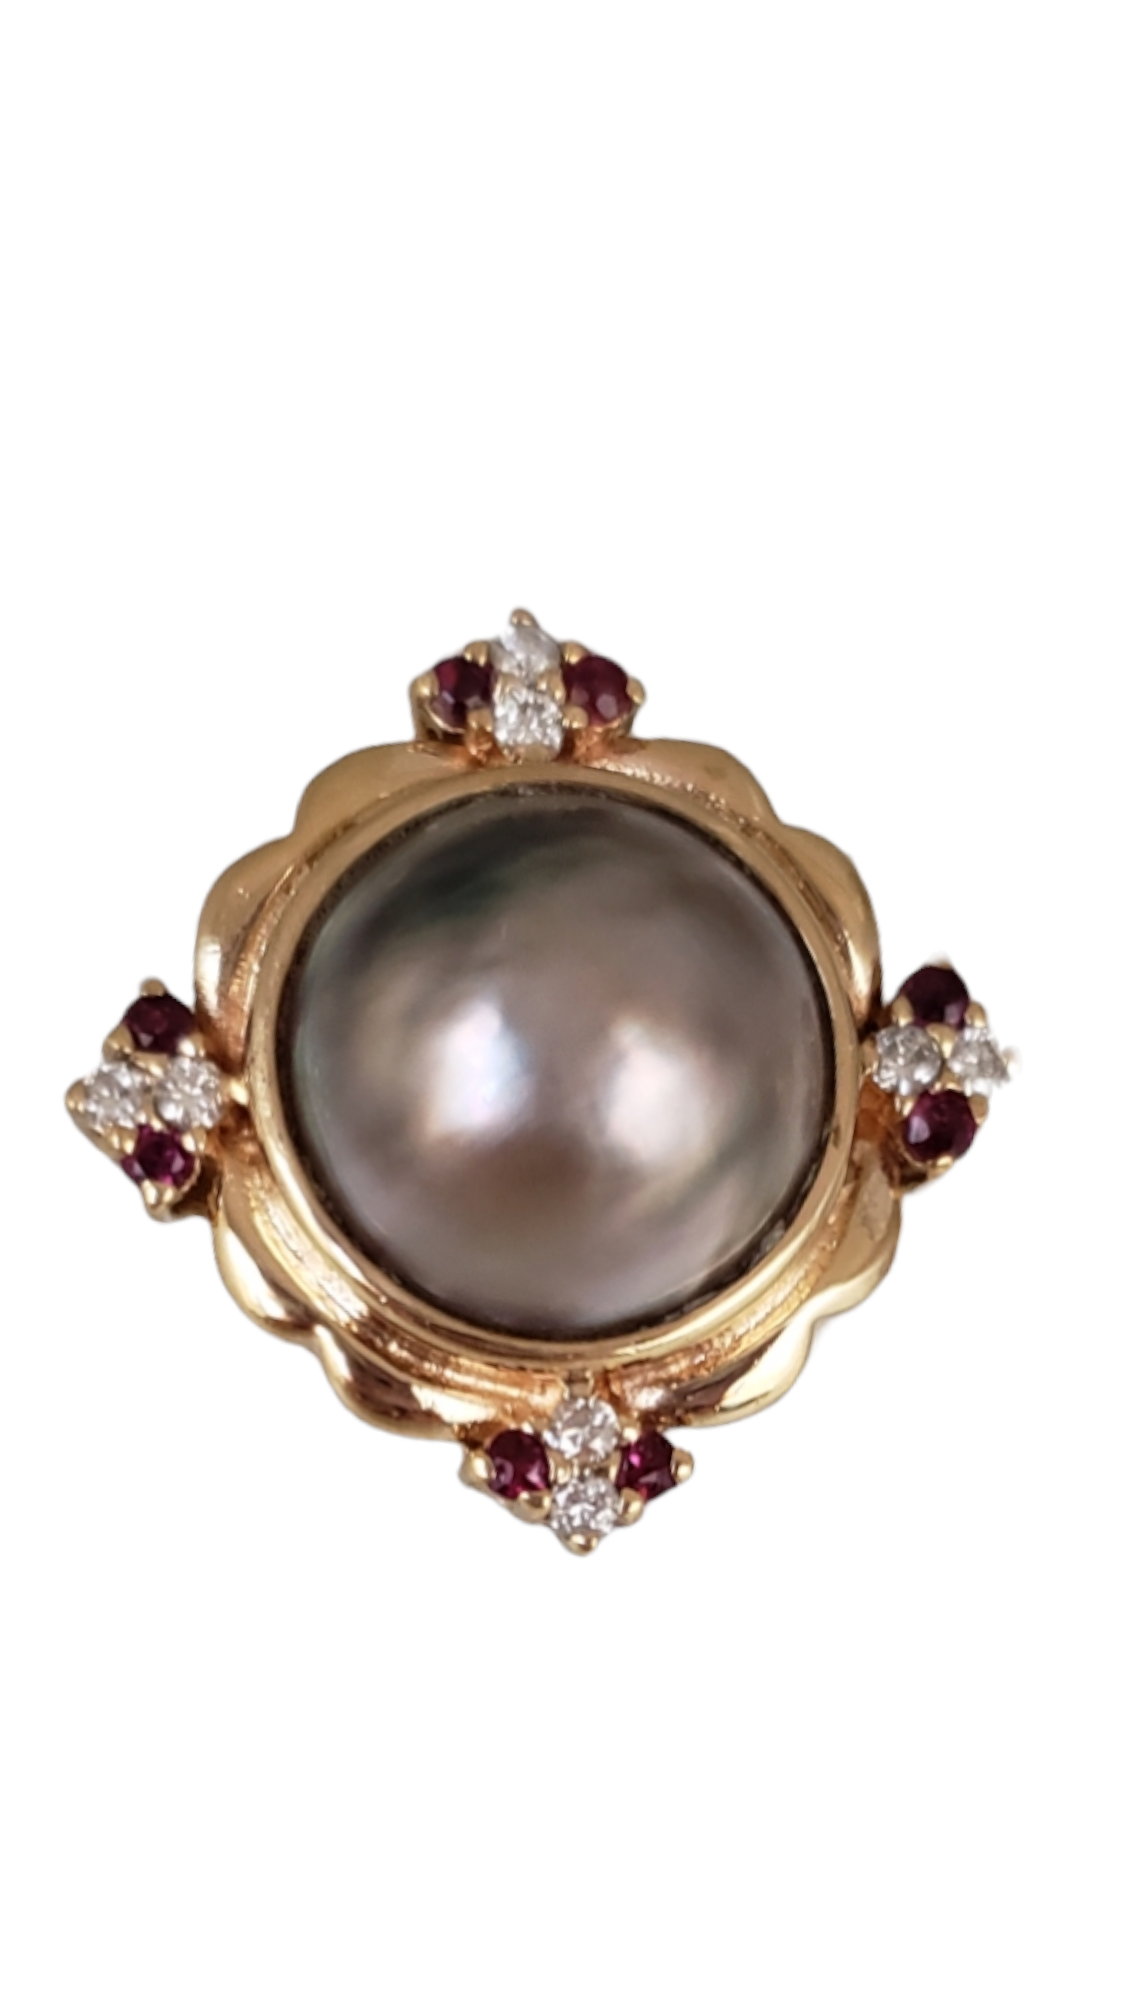 14k Yellow Gold Large Mabe Pearl with Diamonds and Rubies Stud Earrings